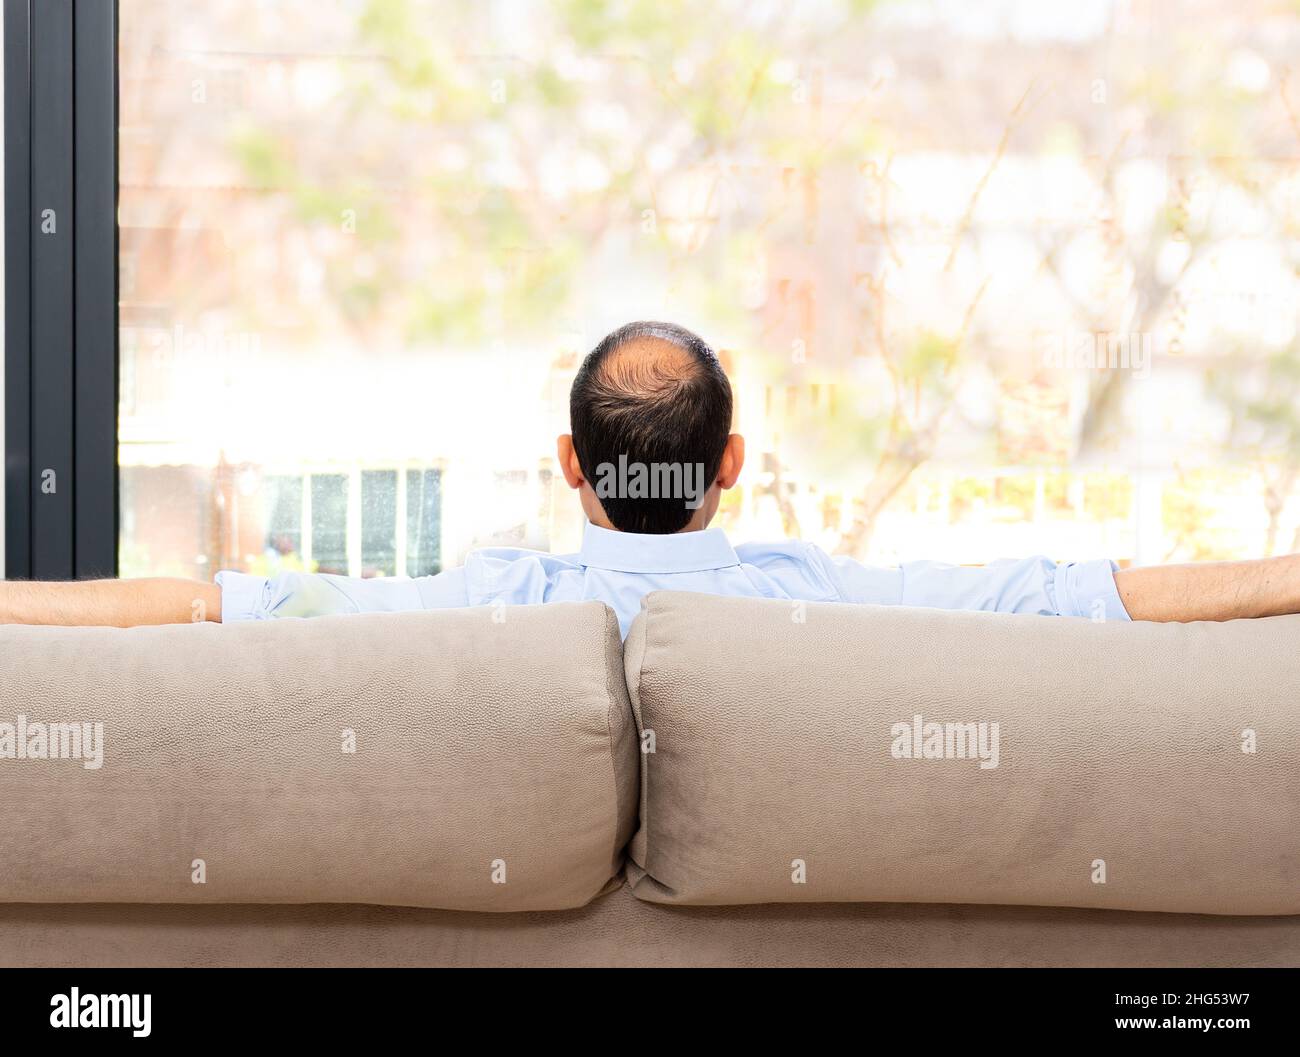 Rear view of a bald and carefree man sitting on a sofa at home and looking outdoors through the window at home Stock Photo